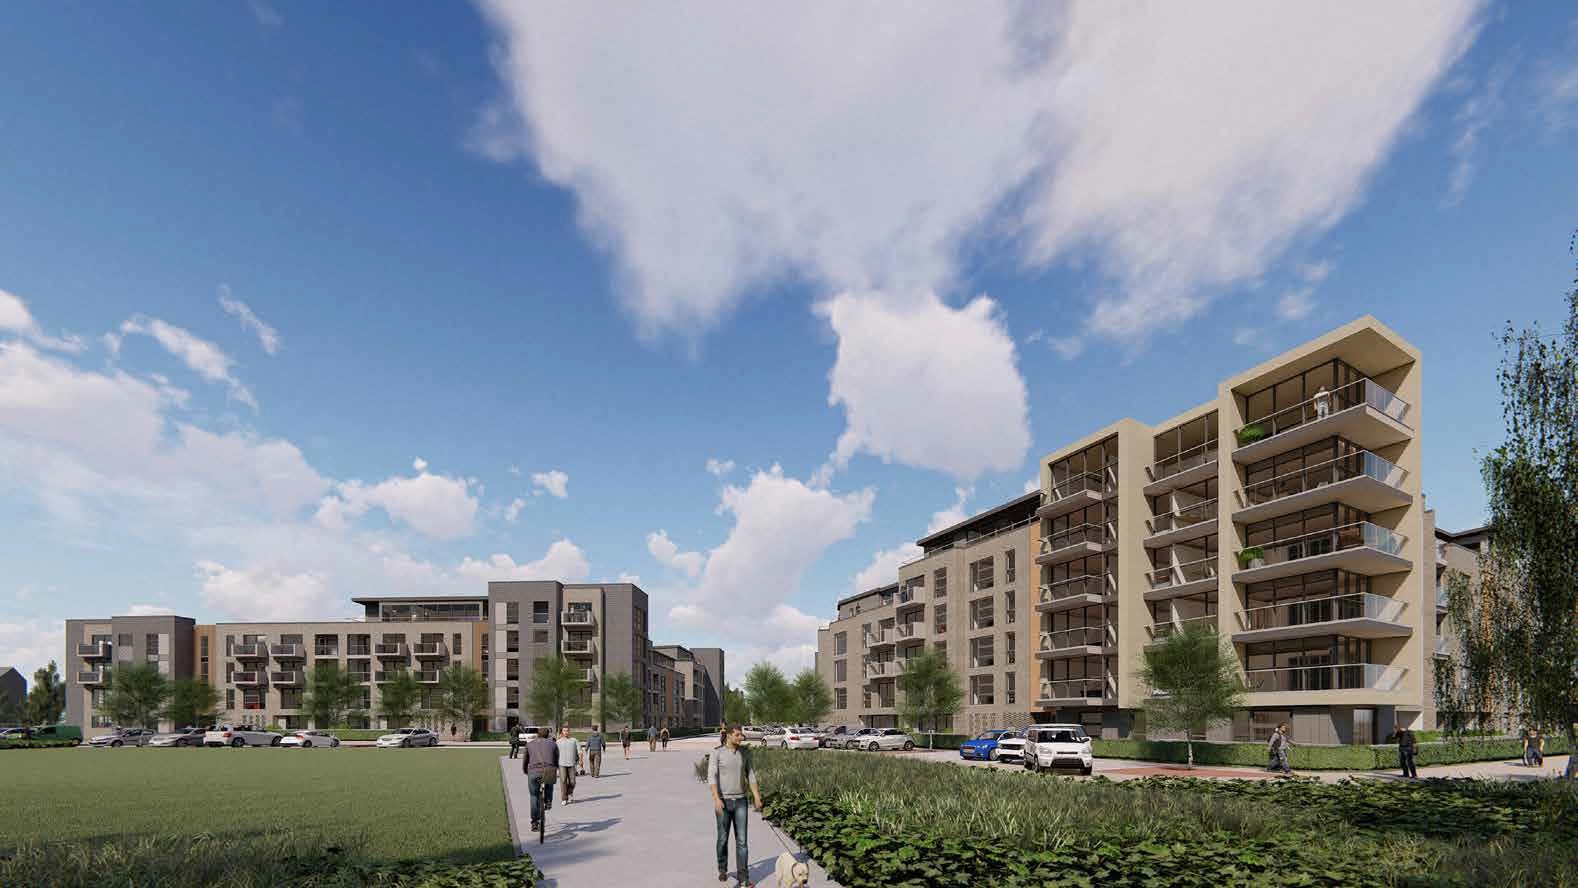 384-apartment development approved for Glasgow's south side